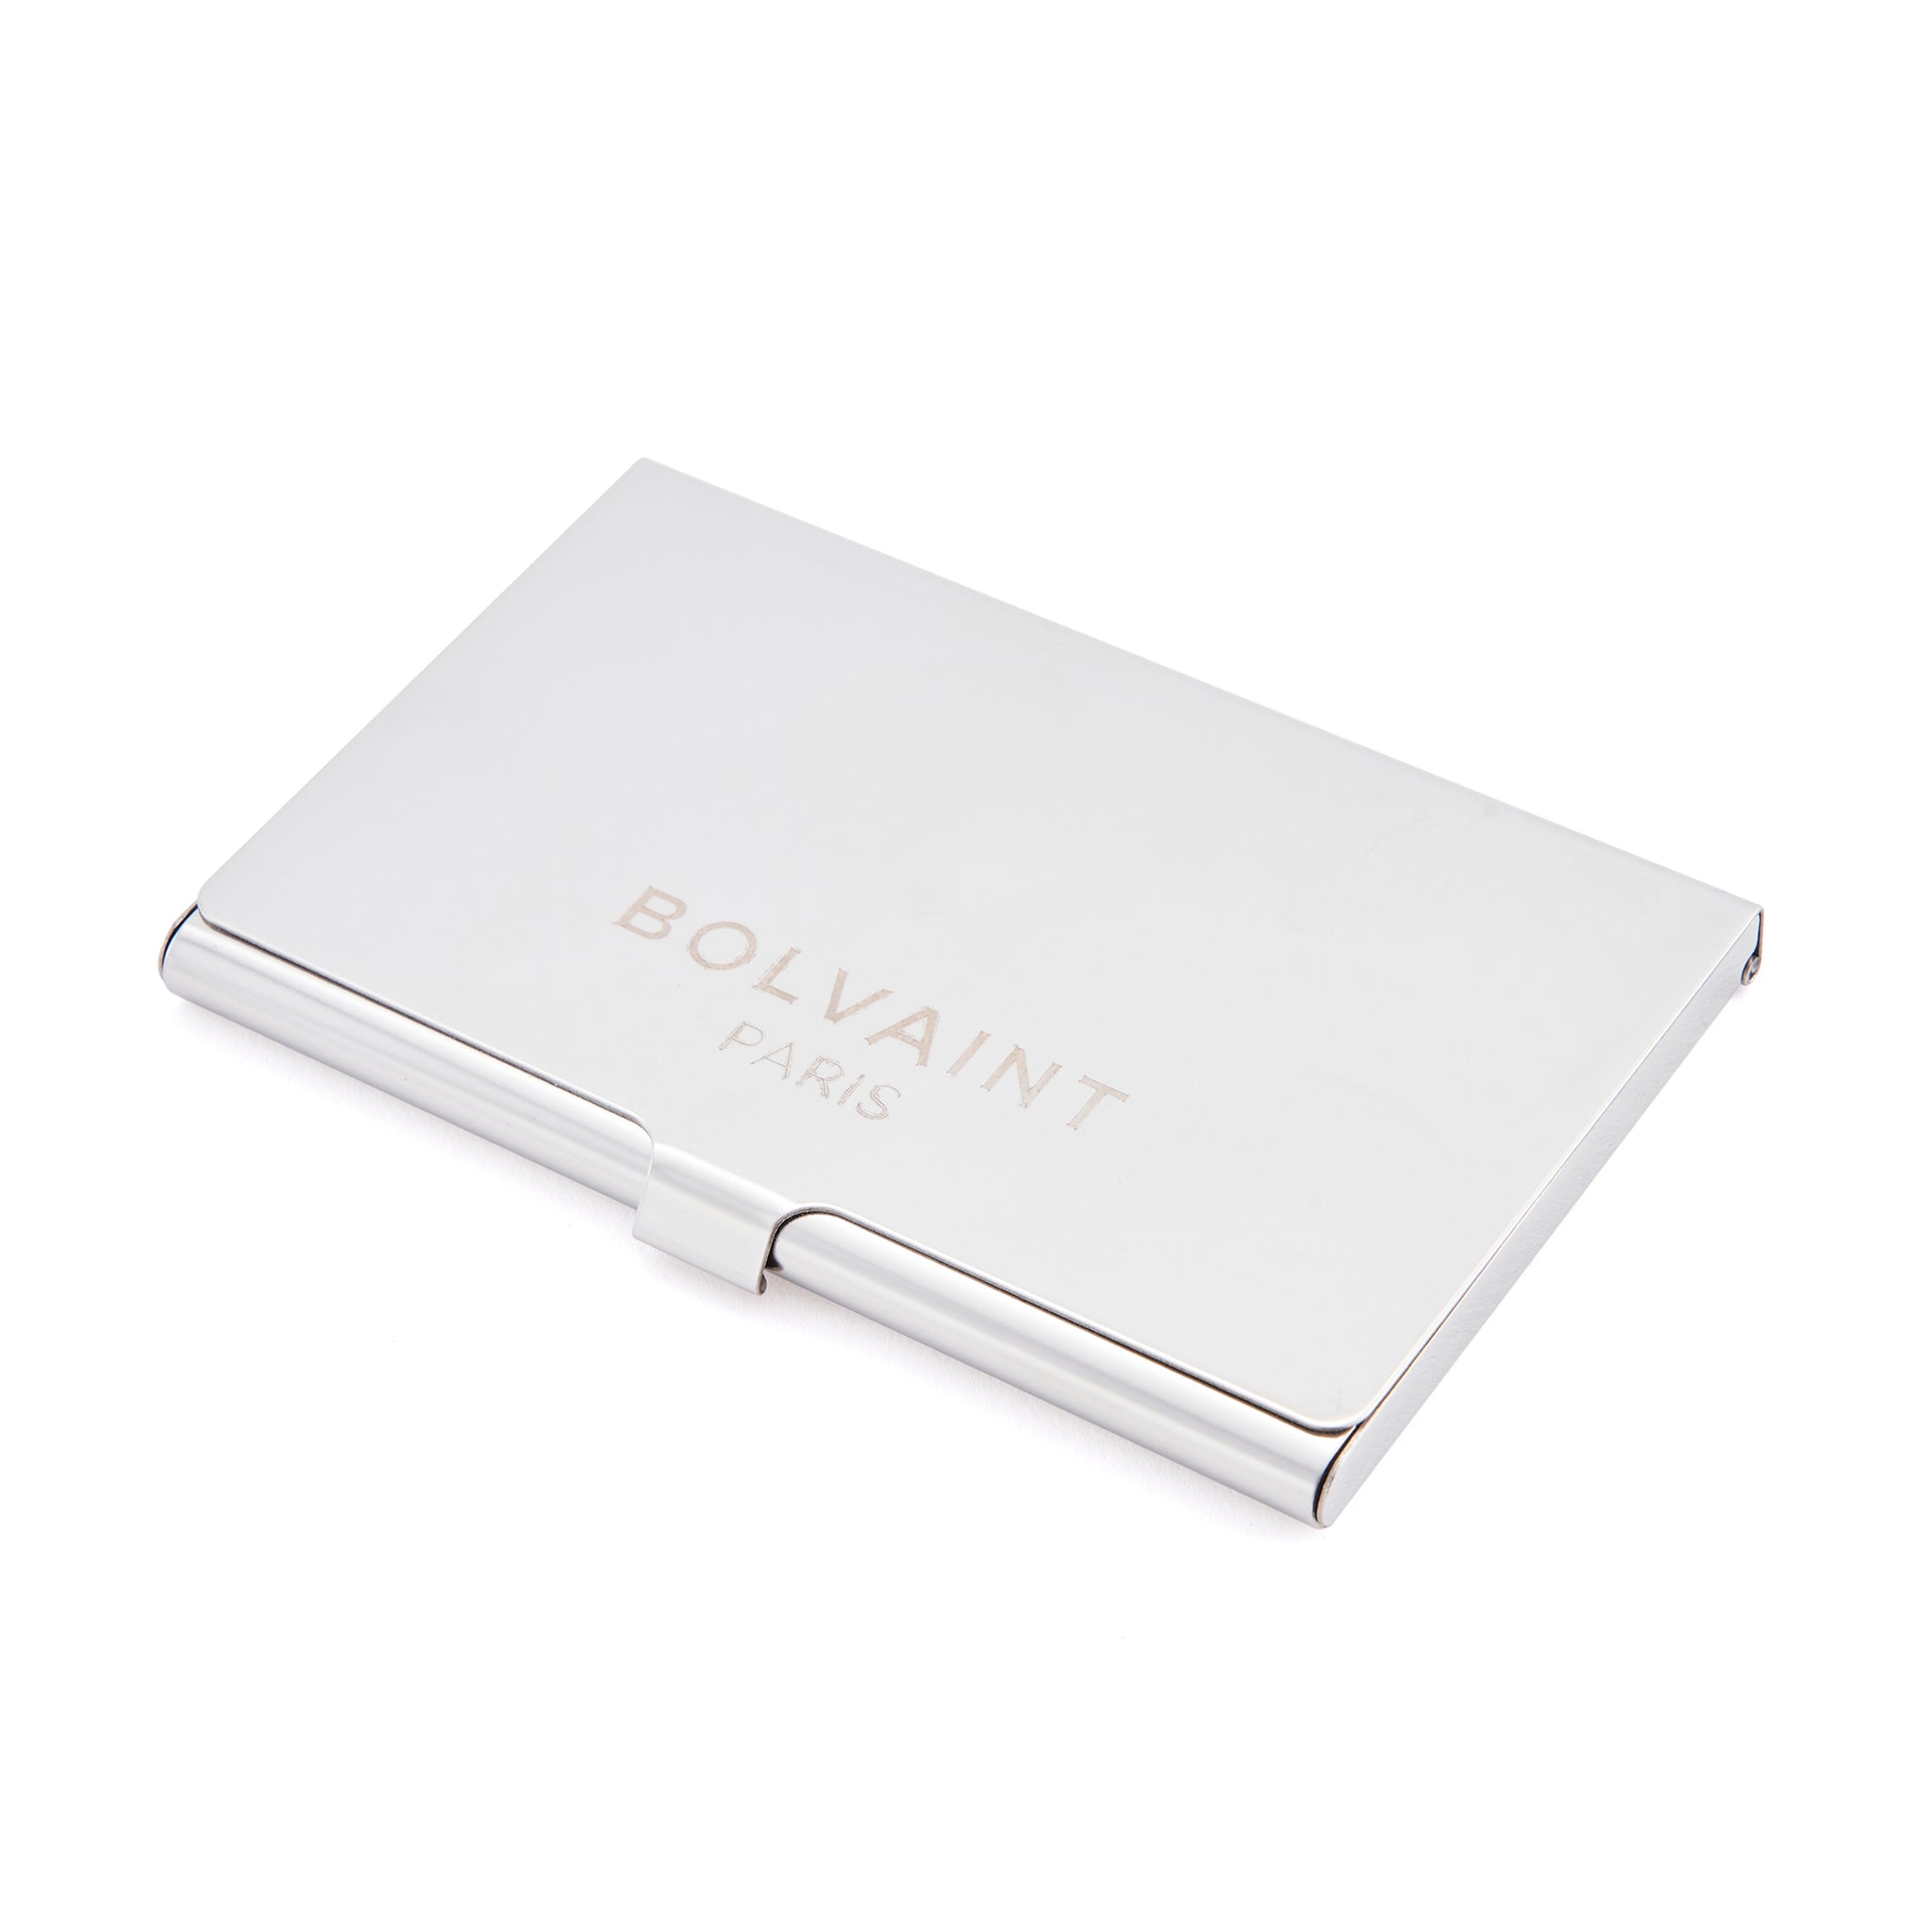 Sinclair - Cardholder in Silver